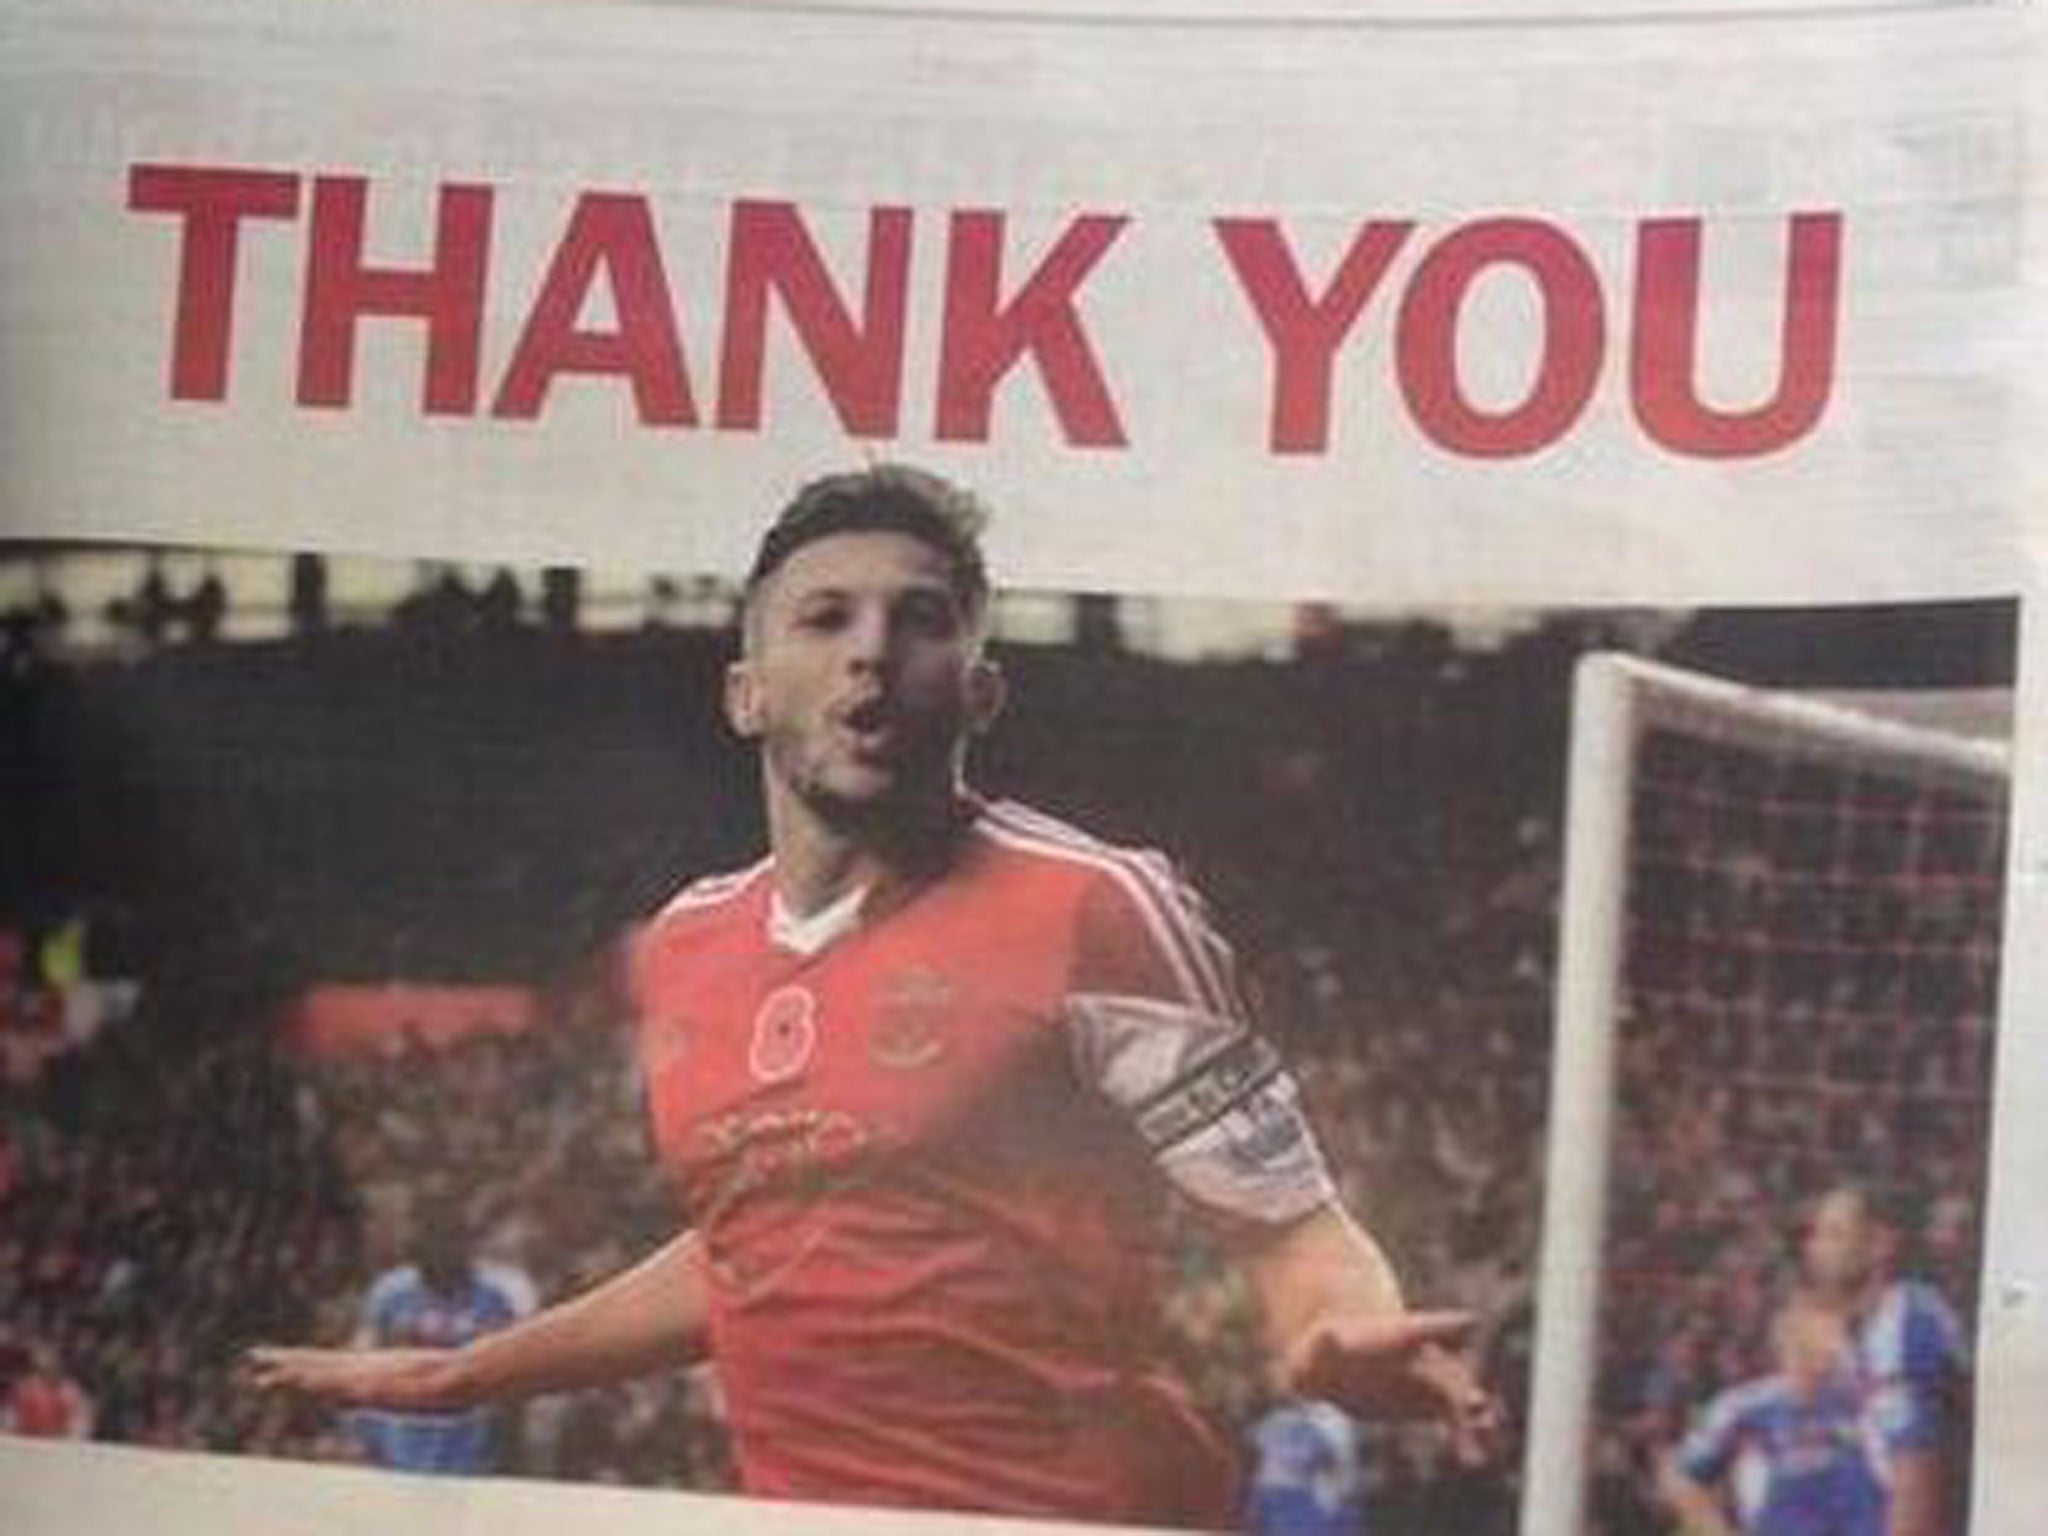 Liverpool new boy Adam Lallana has taken out a full page advert in the Daily Echo to say thank you to Southampton fans